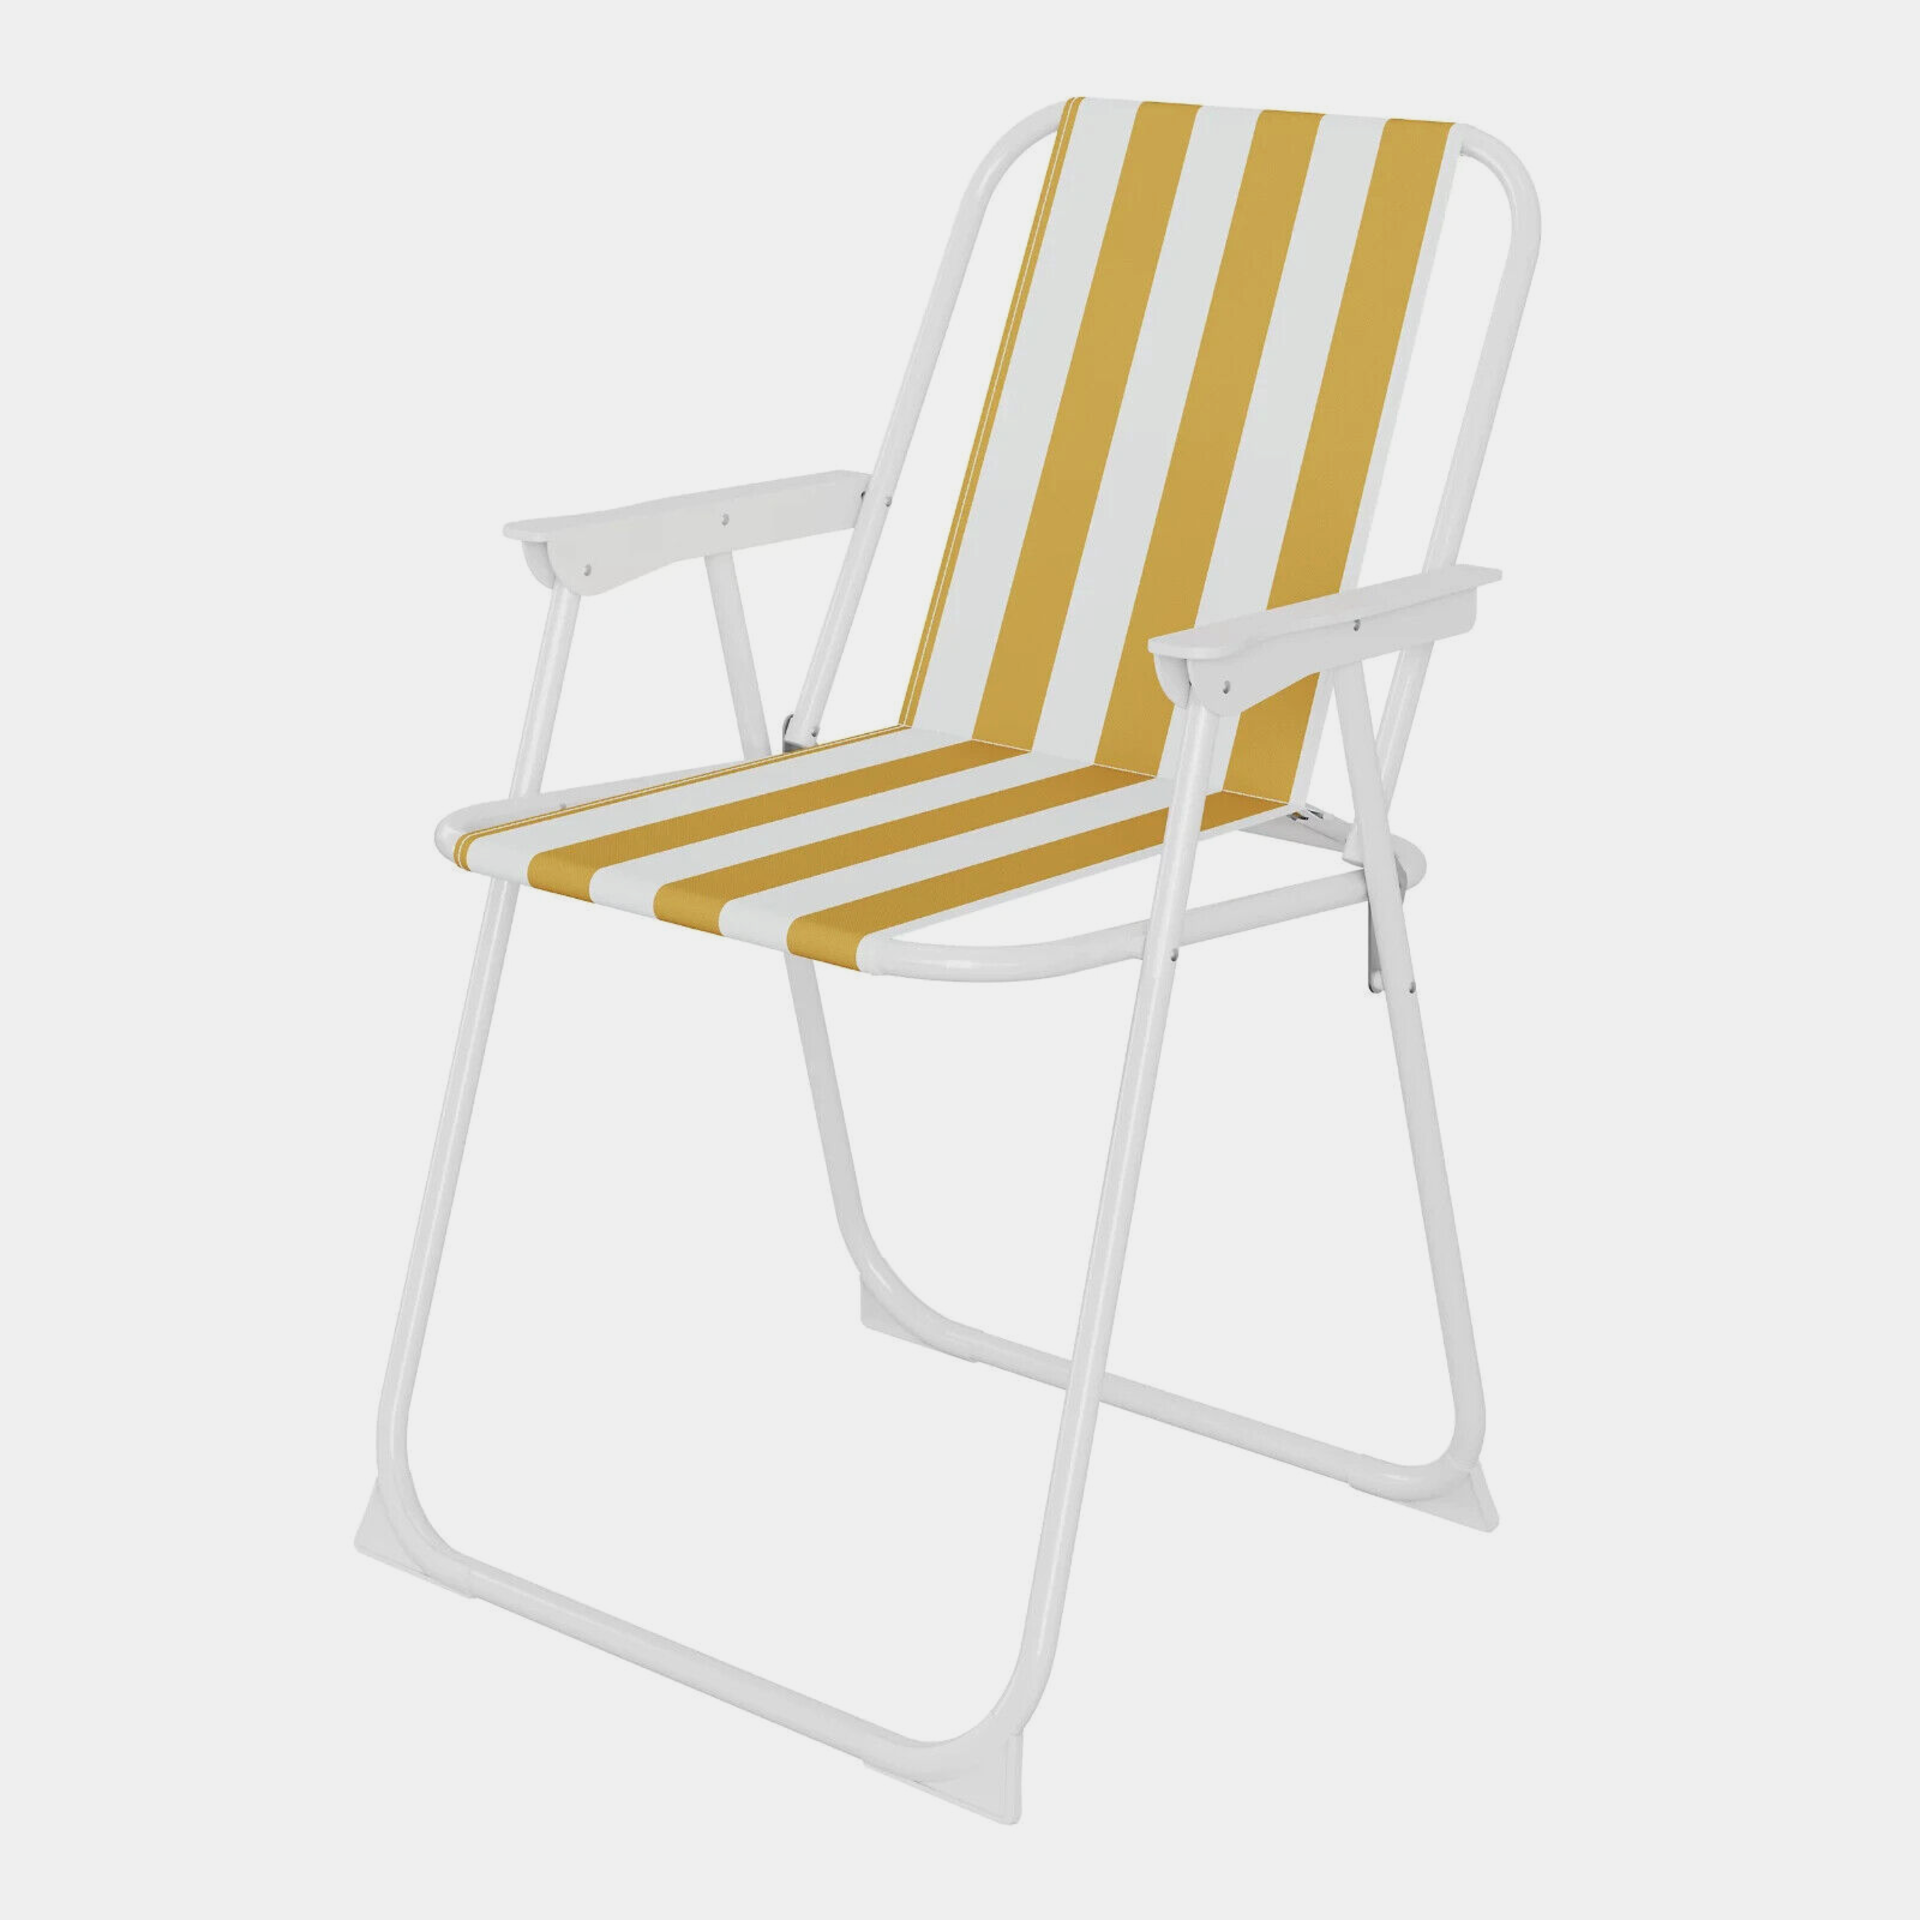 7 X BRAND NEW CARACOU DECK CHAIRS R11-3